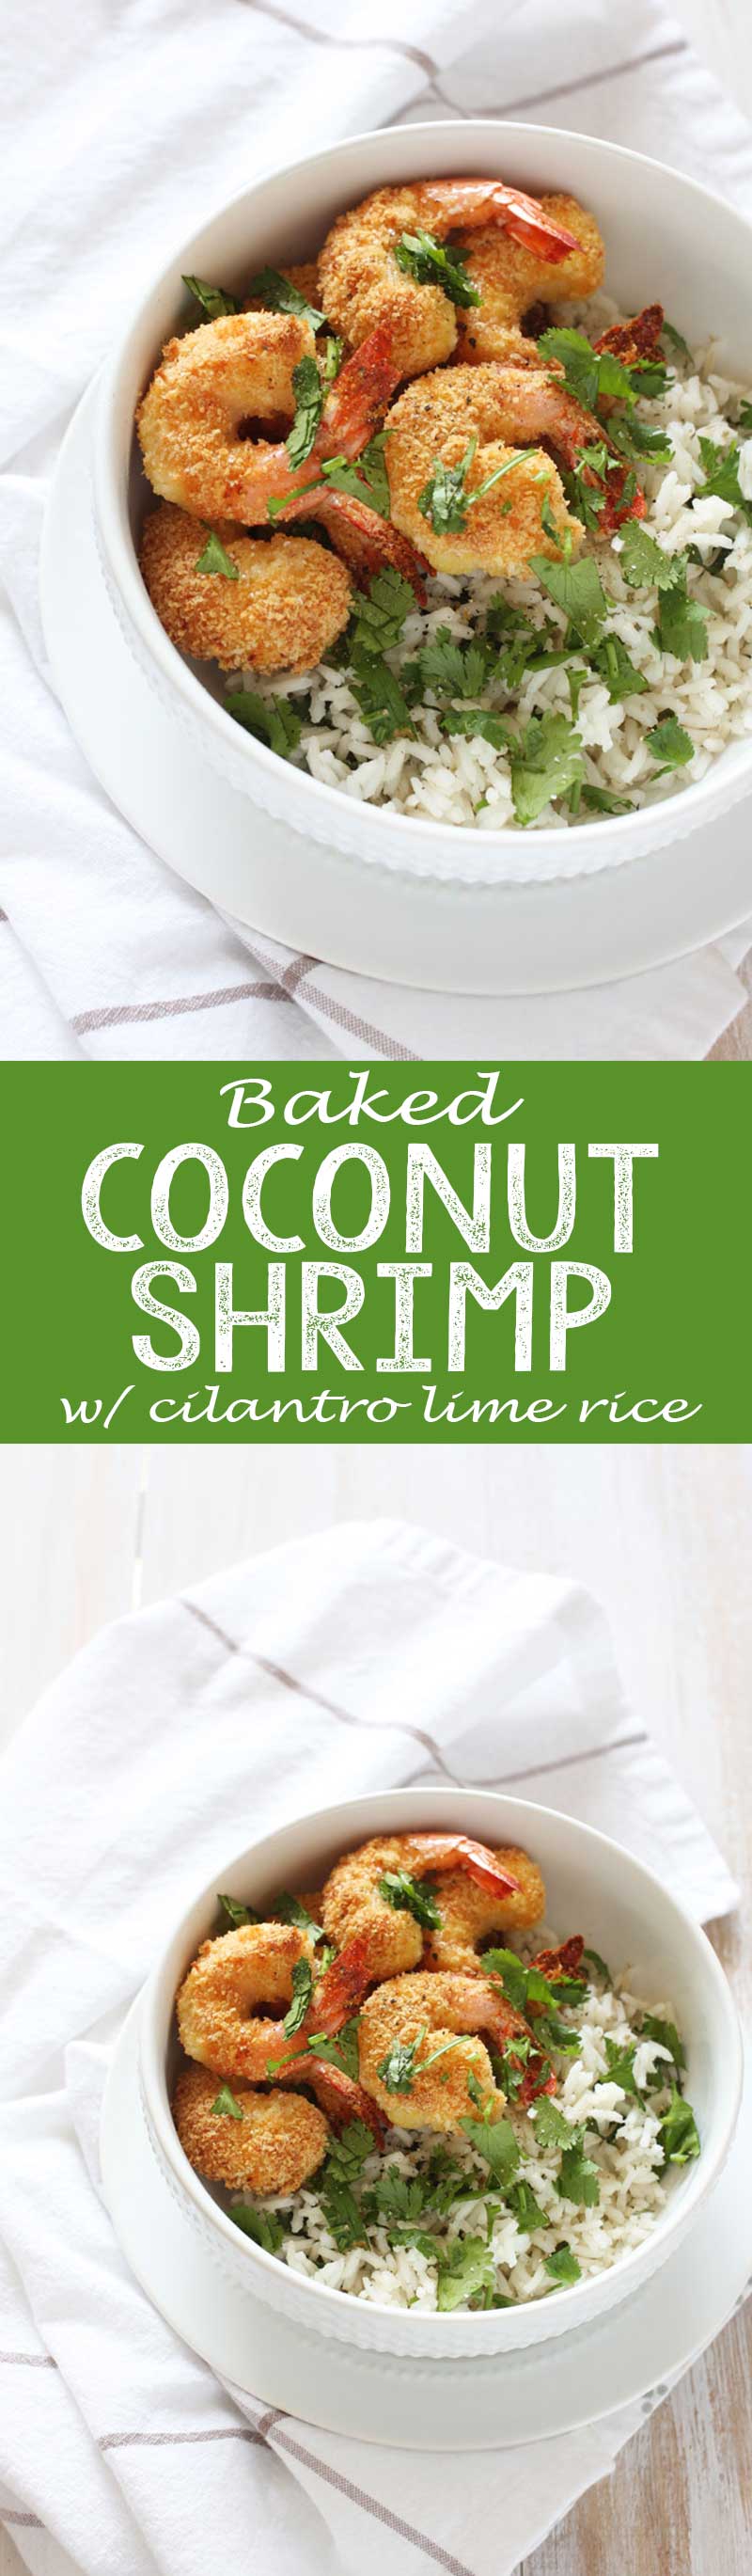 Baked Coconut Shrimp with Cilantro Lime Rice